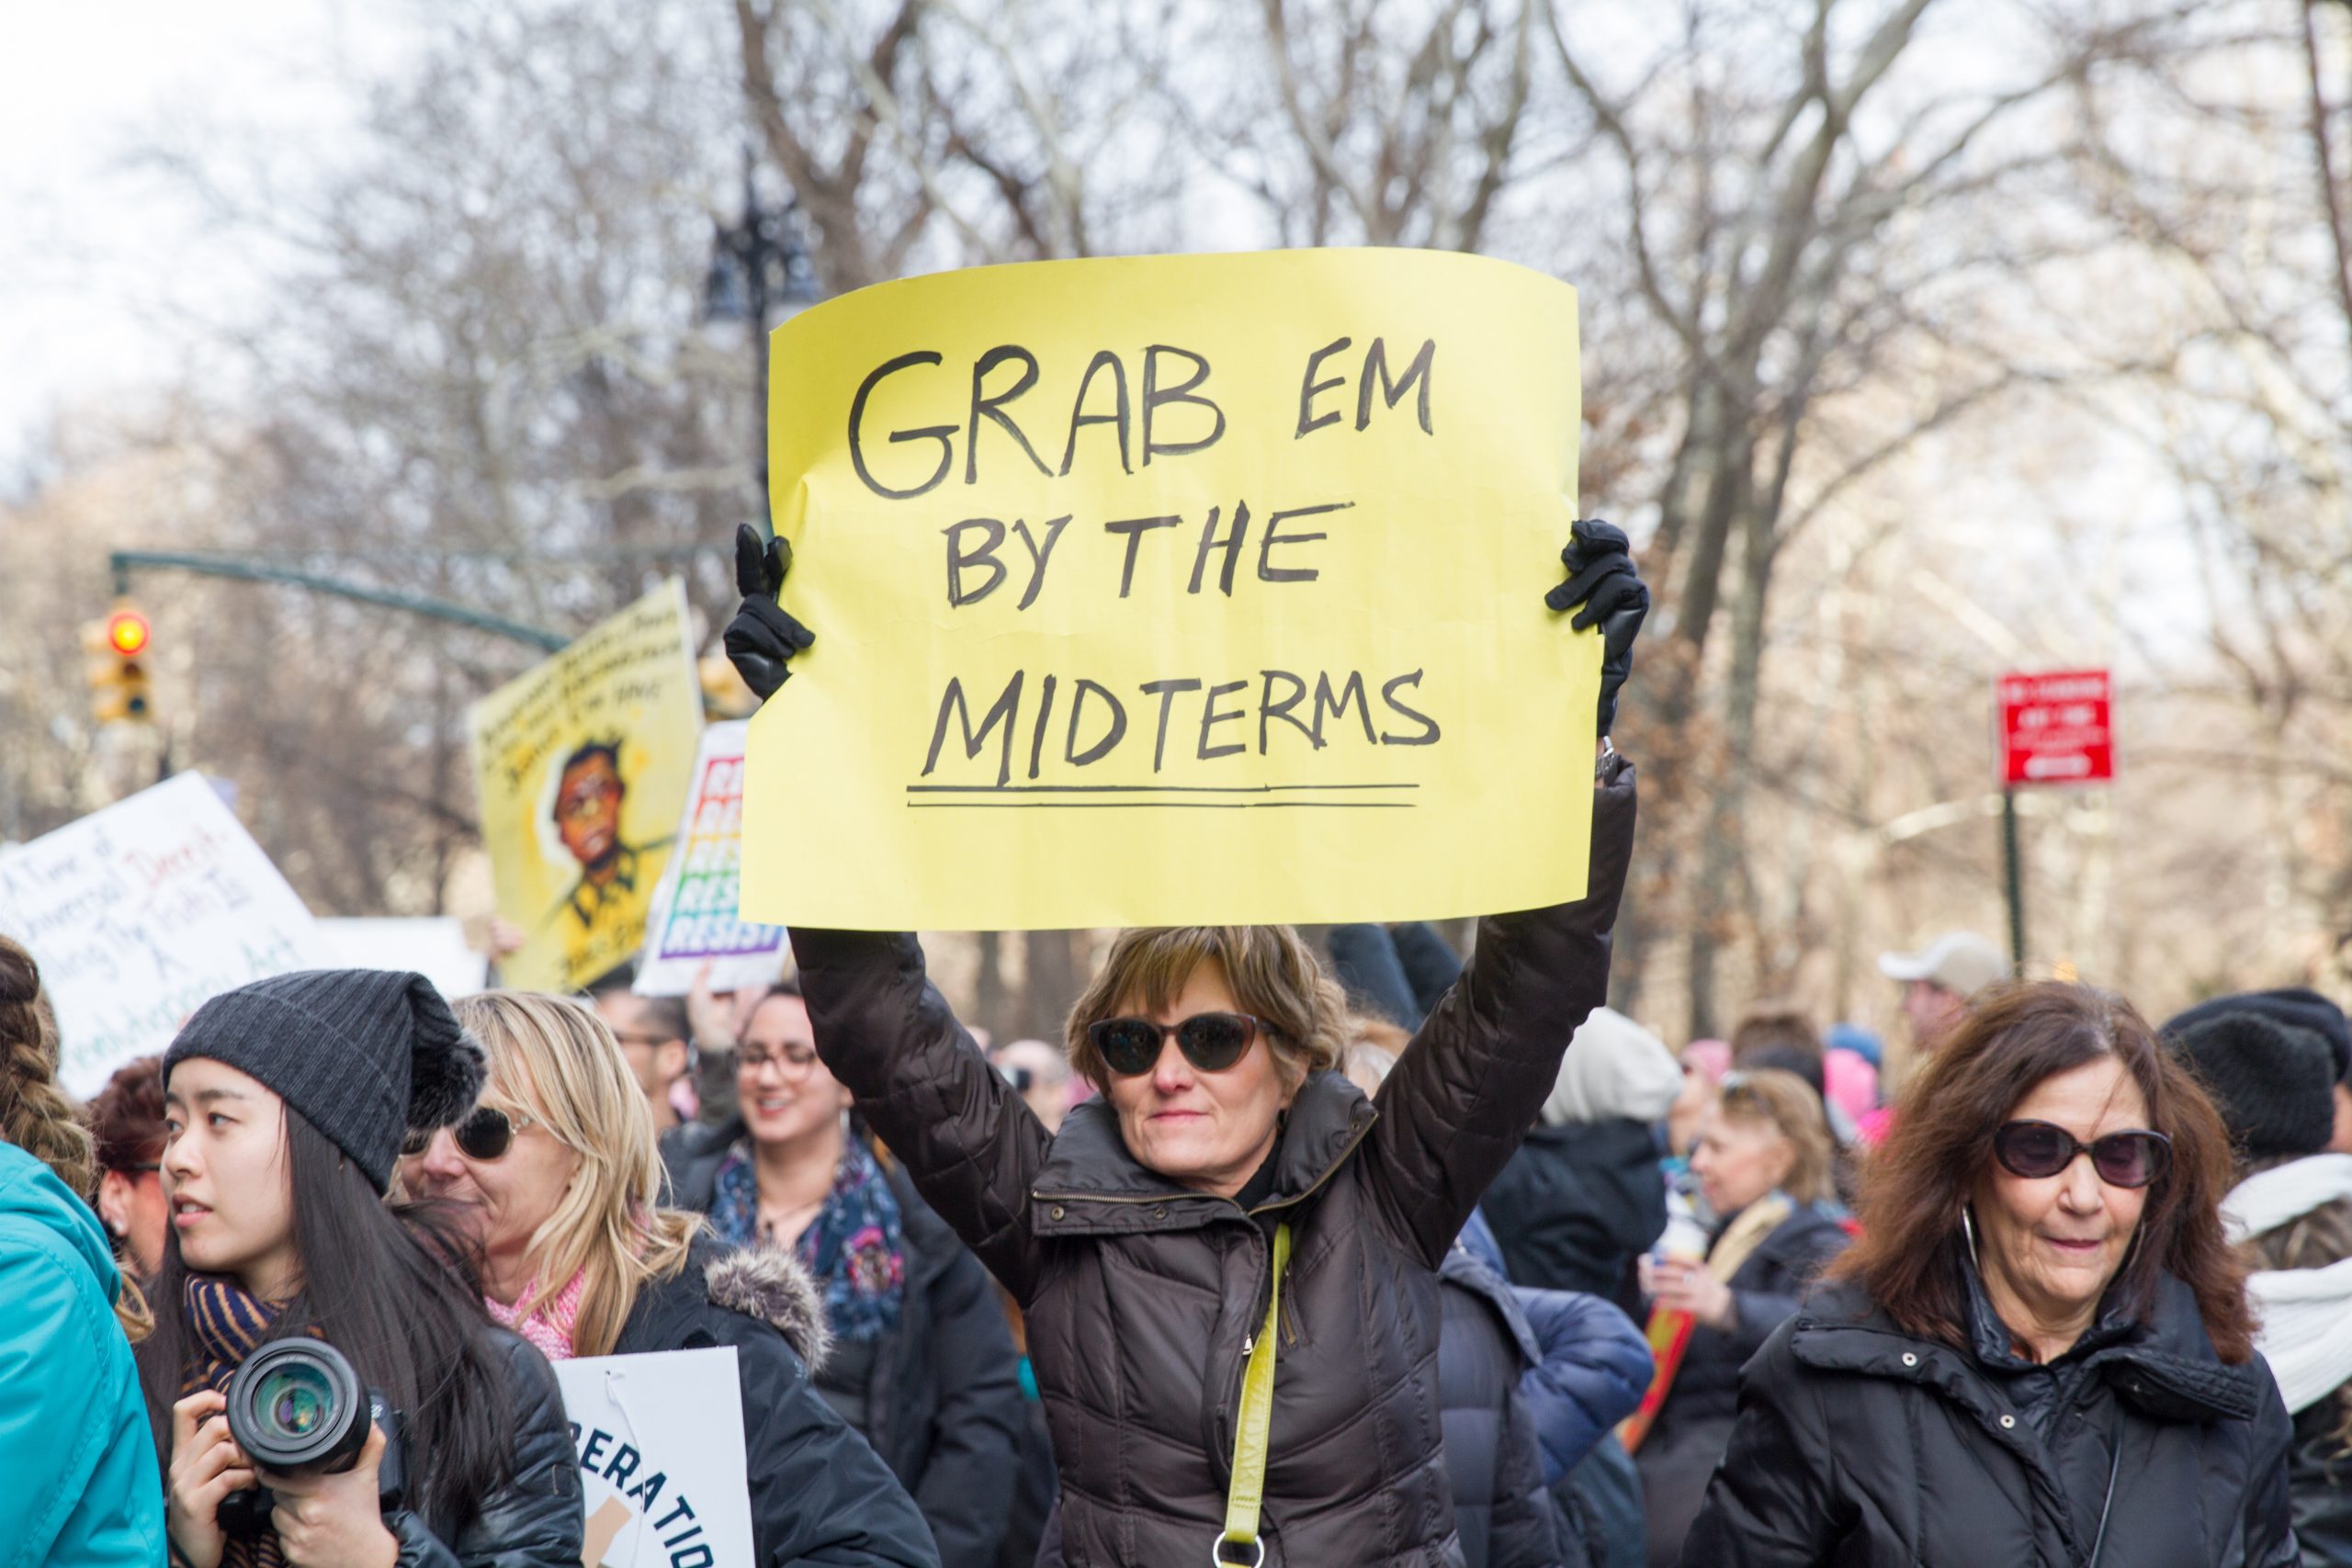 Protester holding sign that says 'GRAB EM BY THE MIDTERMS' at a rally.